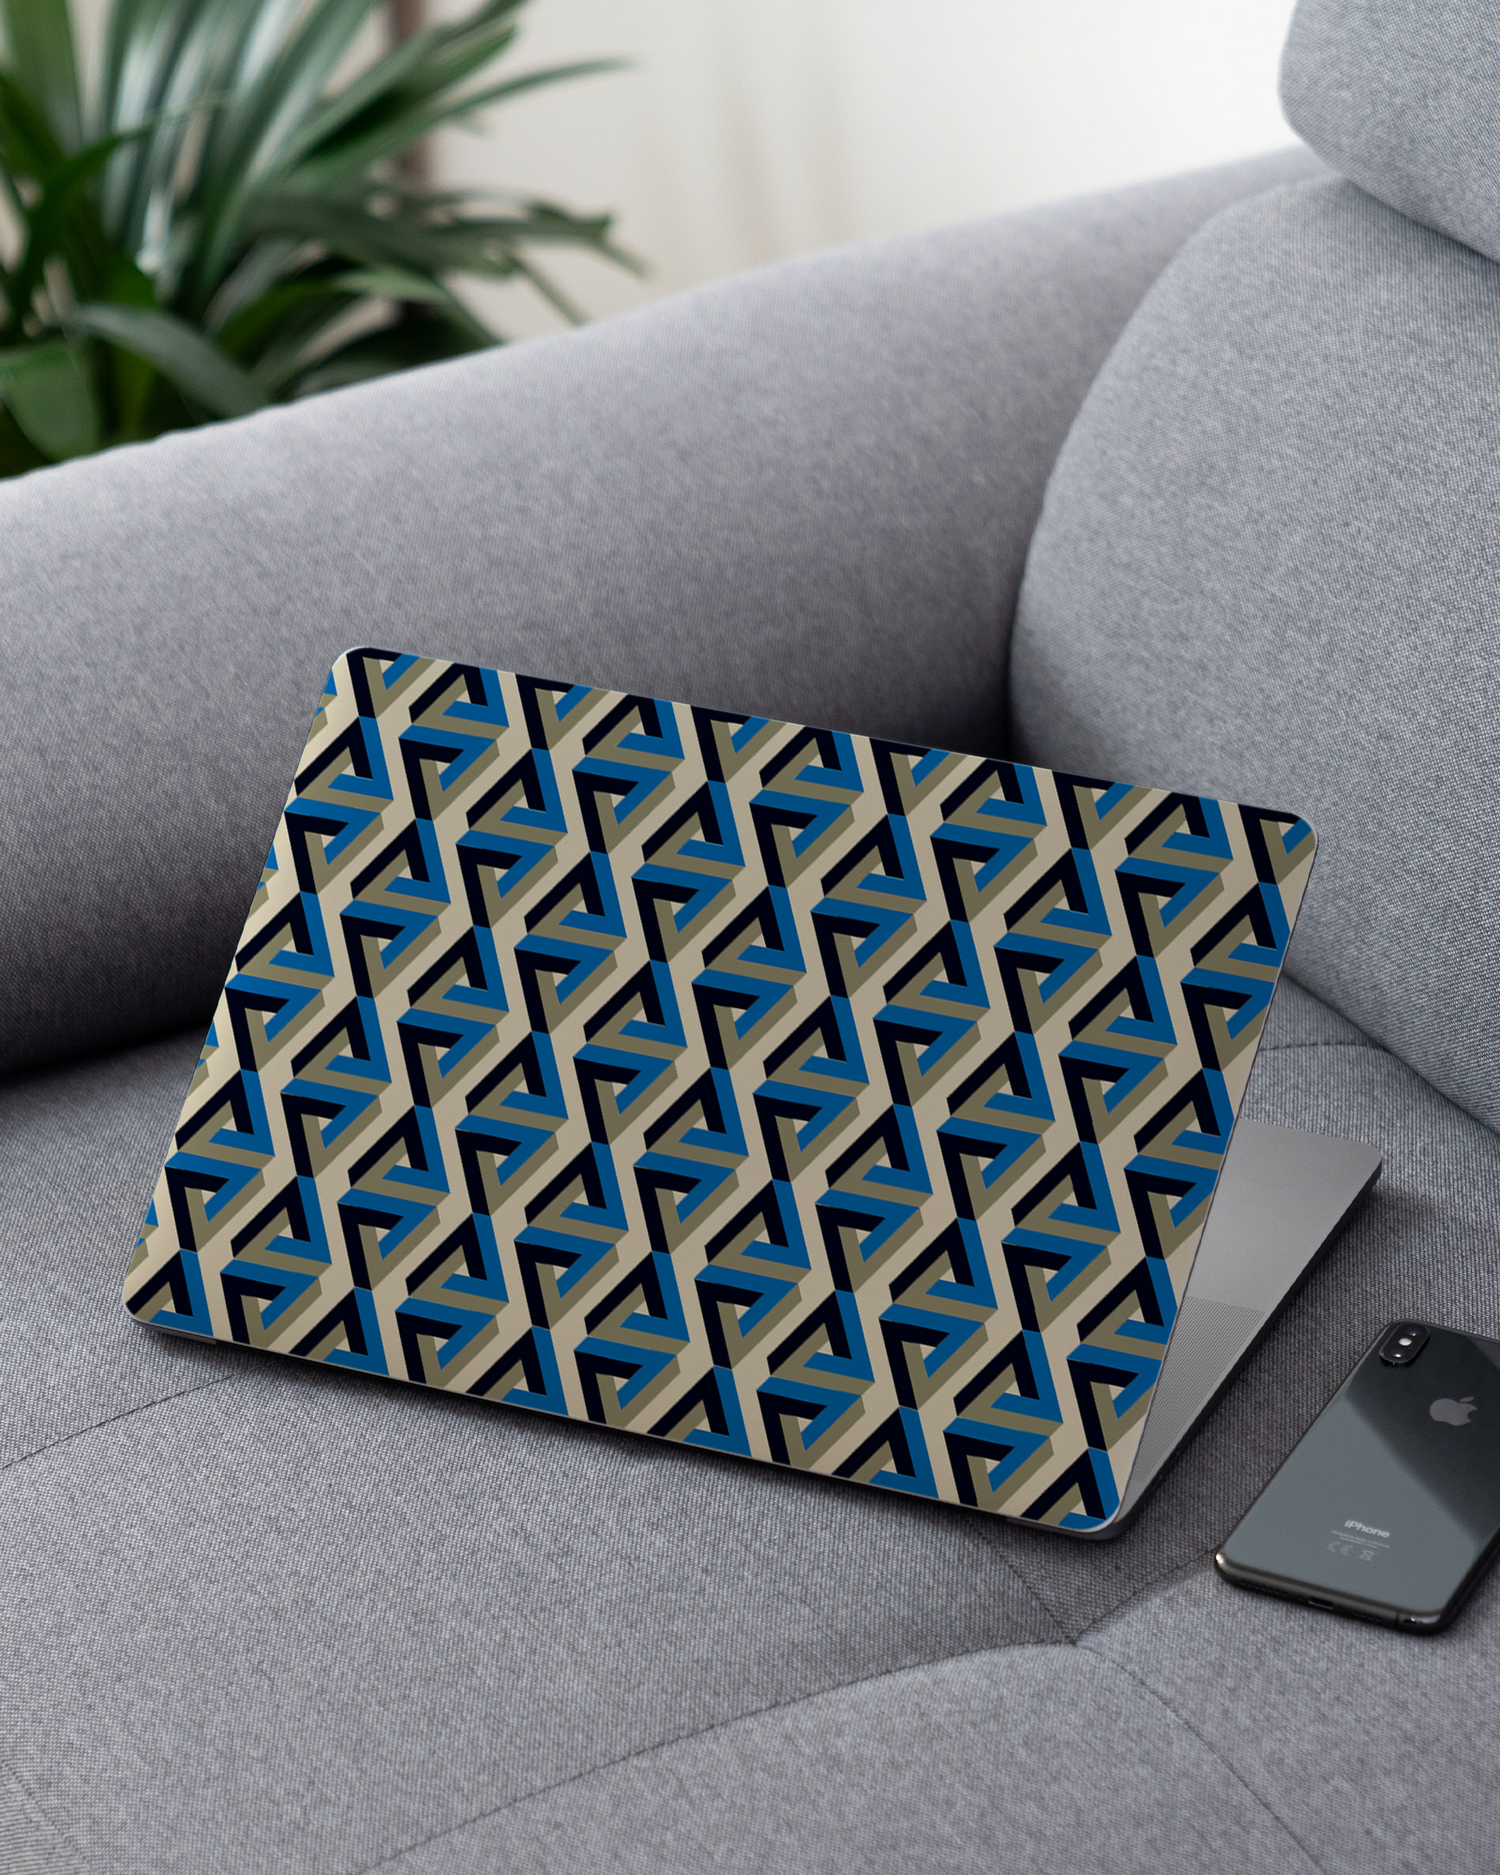 Penrose Pattern Laptop Skin for 13 inch Apple MacBooks on a couch